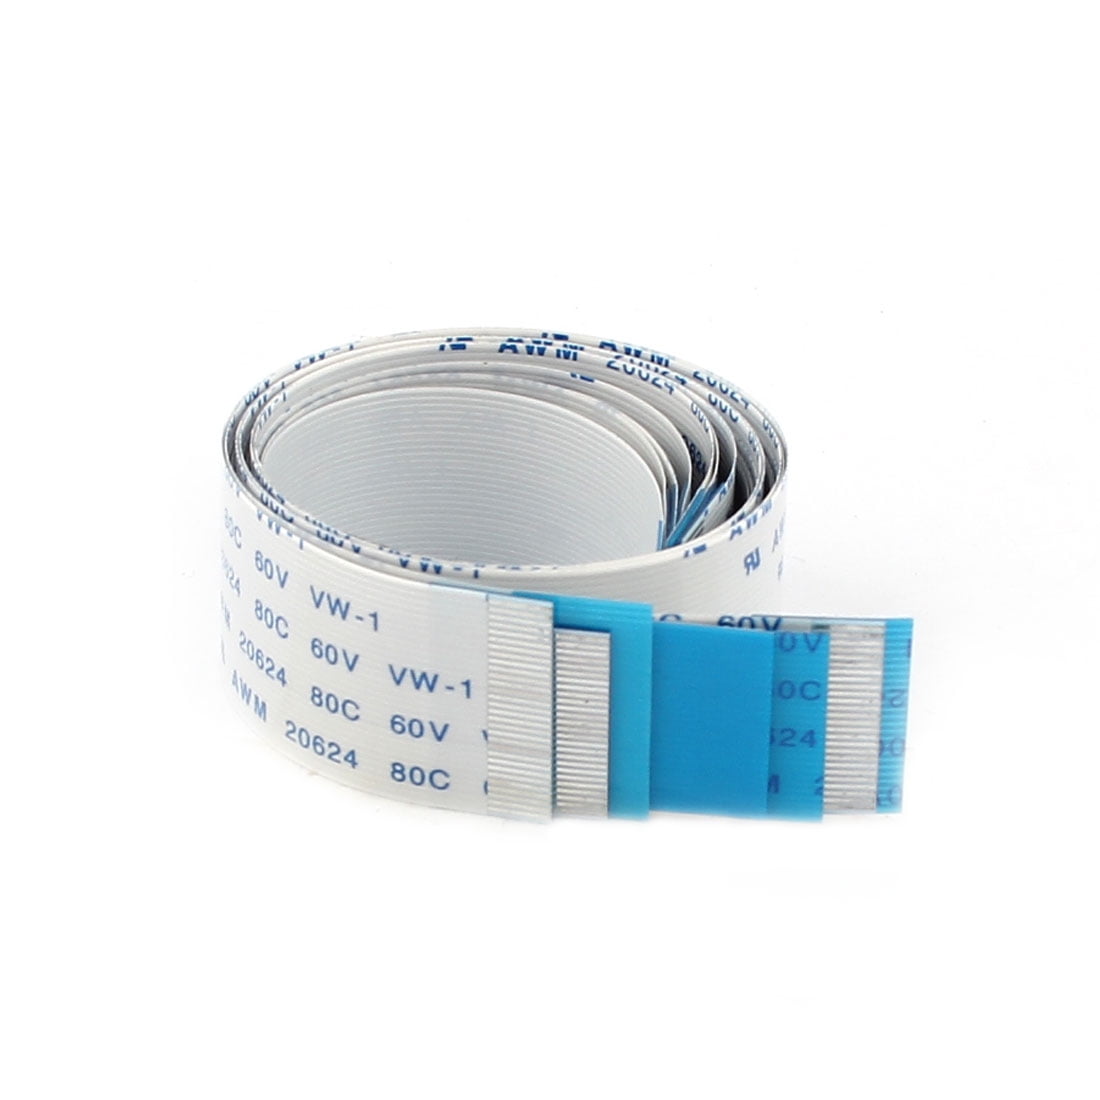 Details about   F/F IDC Connector 20 Pins Flat Ribbon Cable 2.54mm Pitch 30cm 6pcs FREE SHIP 